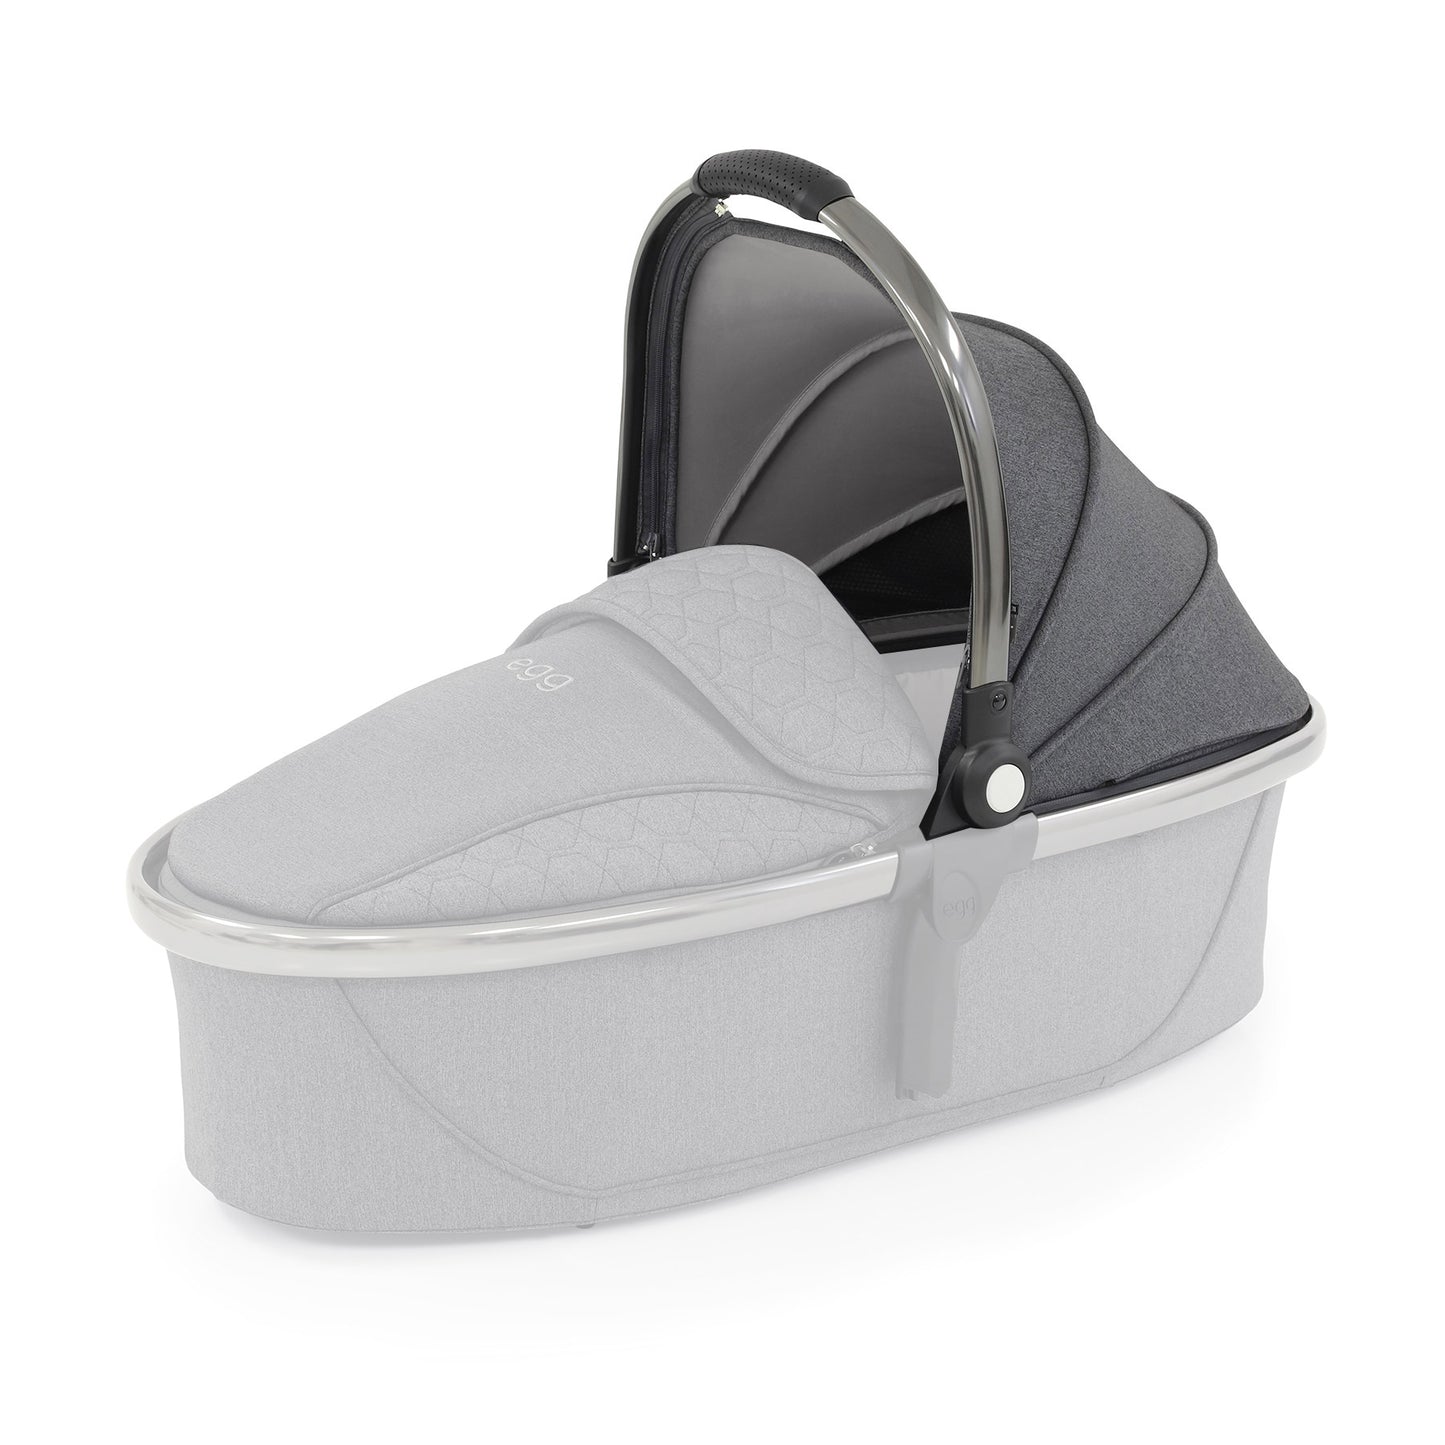 Spare Parts - Carrycot Canopy